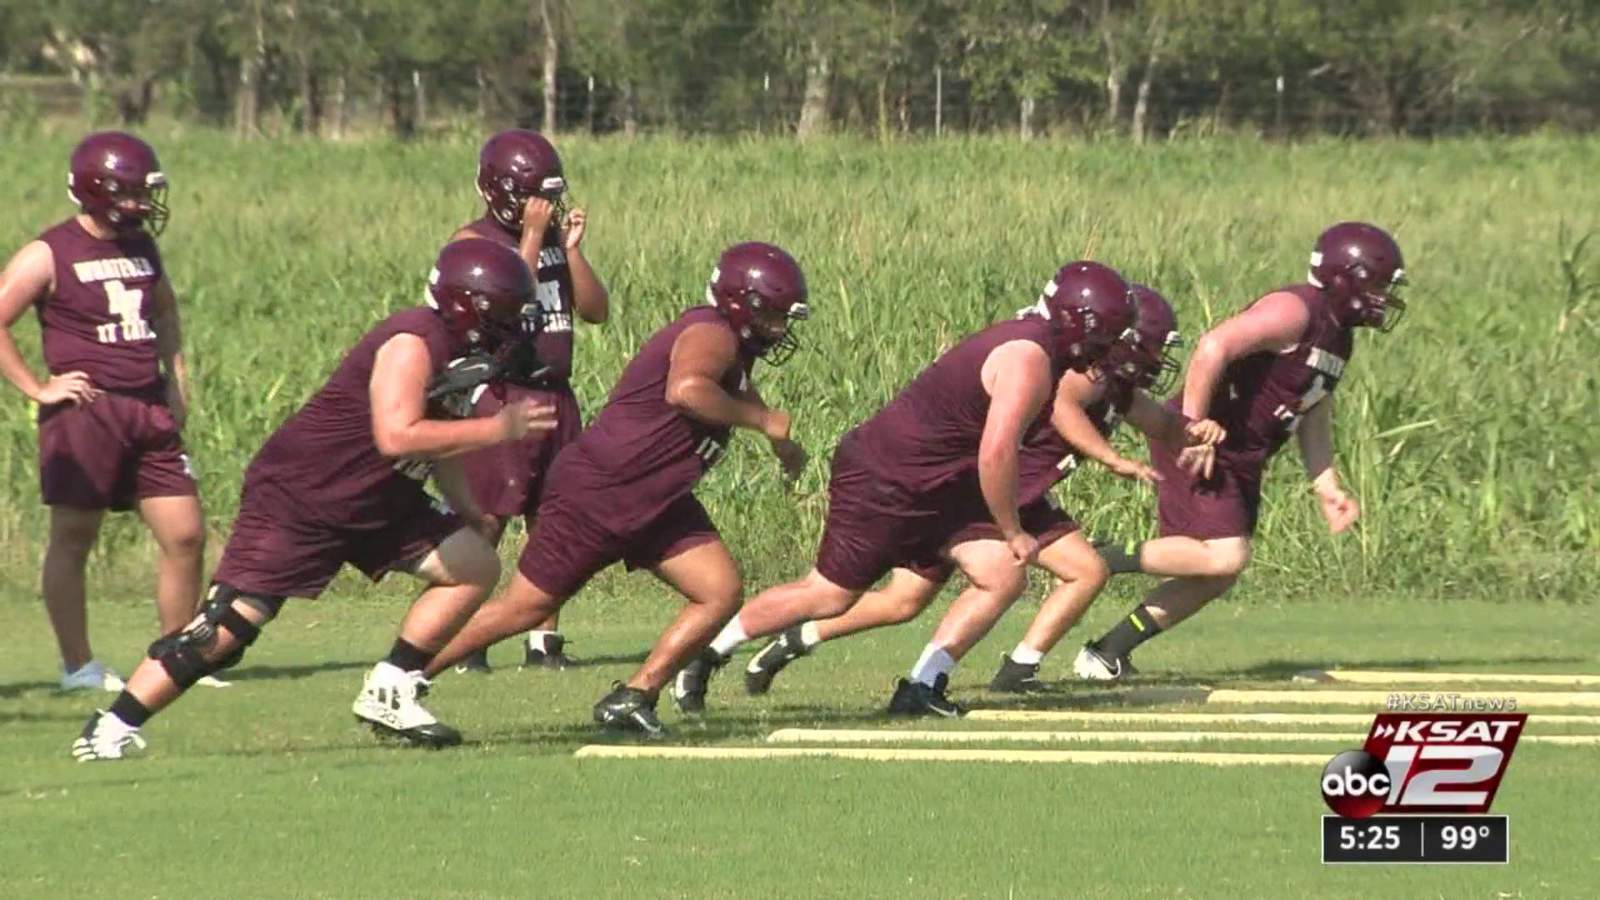 Senior-laden Devine football returns to practice with focus on safety